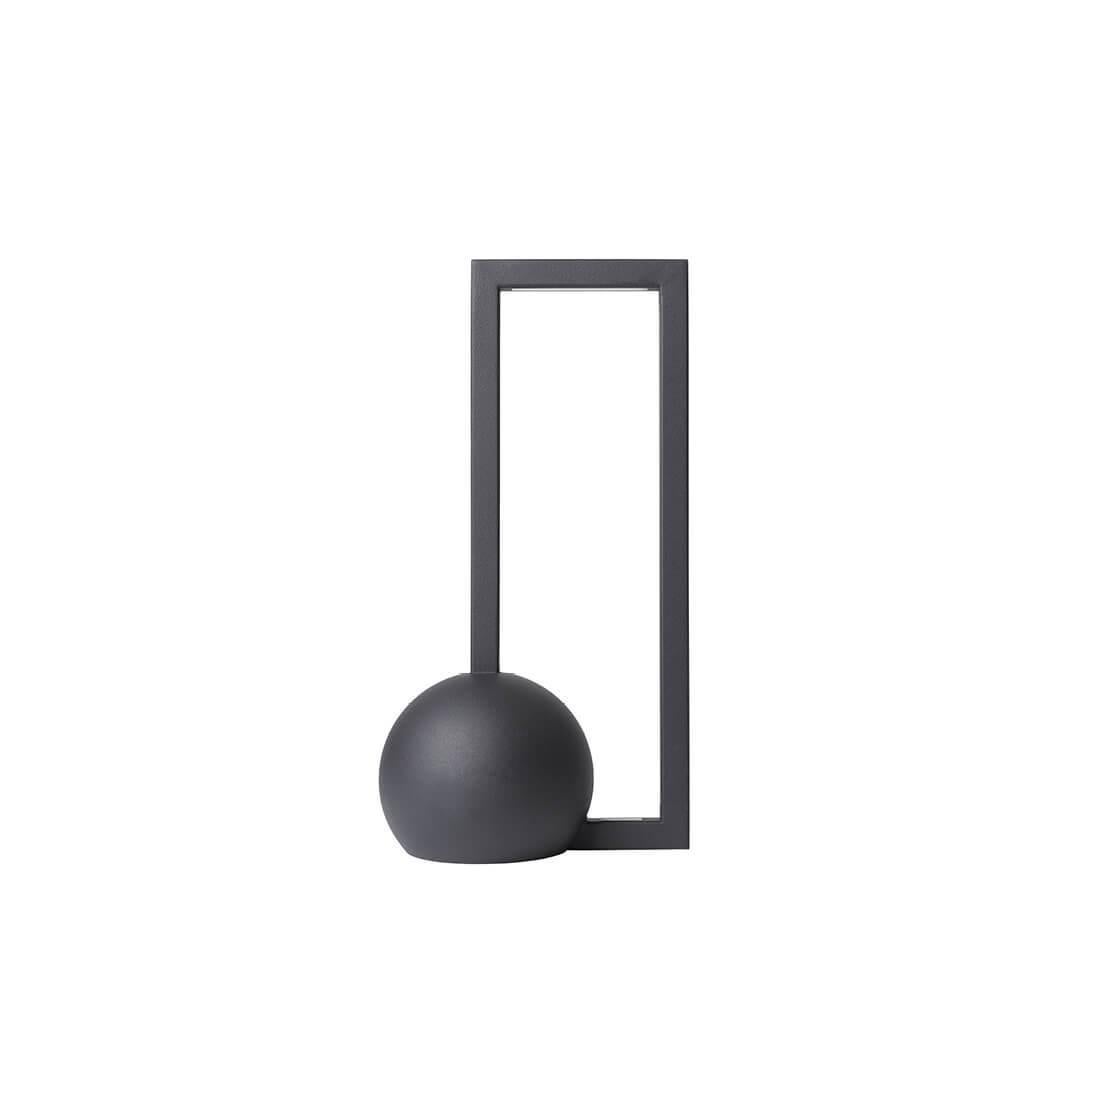 Dot table lamp by Kristina Dam Studio
Materials: black steel. LED lights.
Dimensions: 13 x 20 x h 41cm.

The Modernist furniture collection takes notions of modern design and yet the distinctive design touch of Kristina Dam Studio is evident in